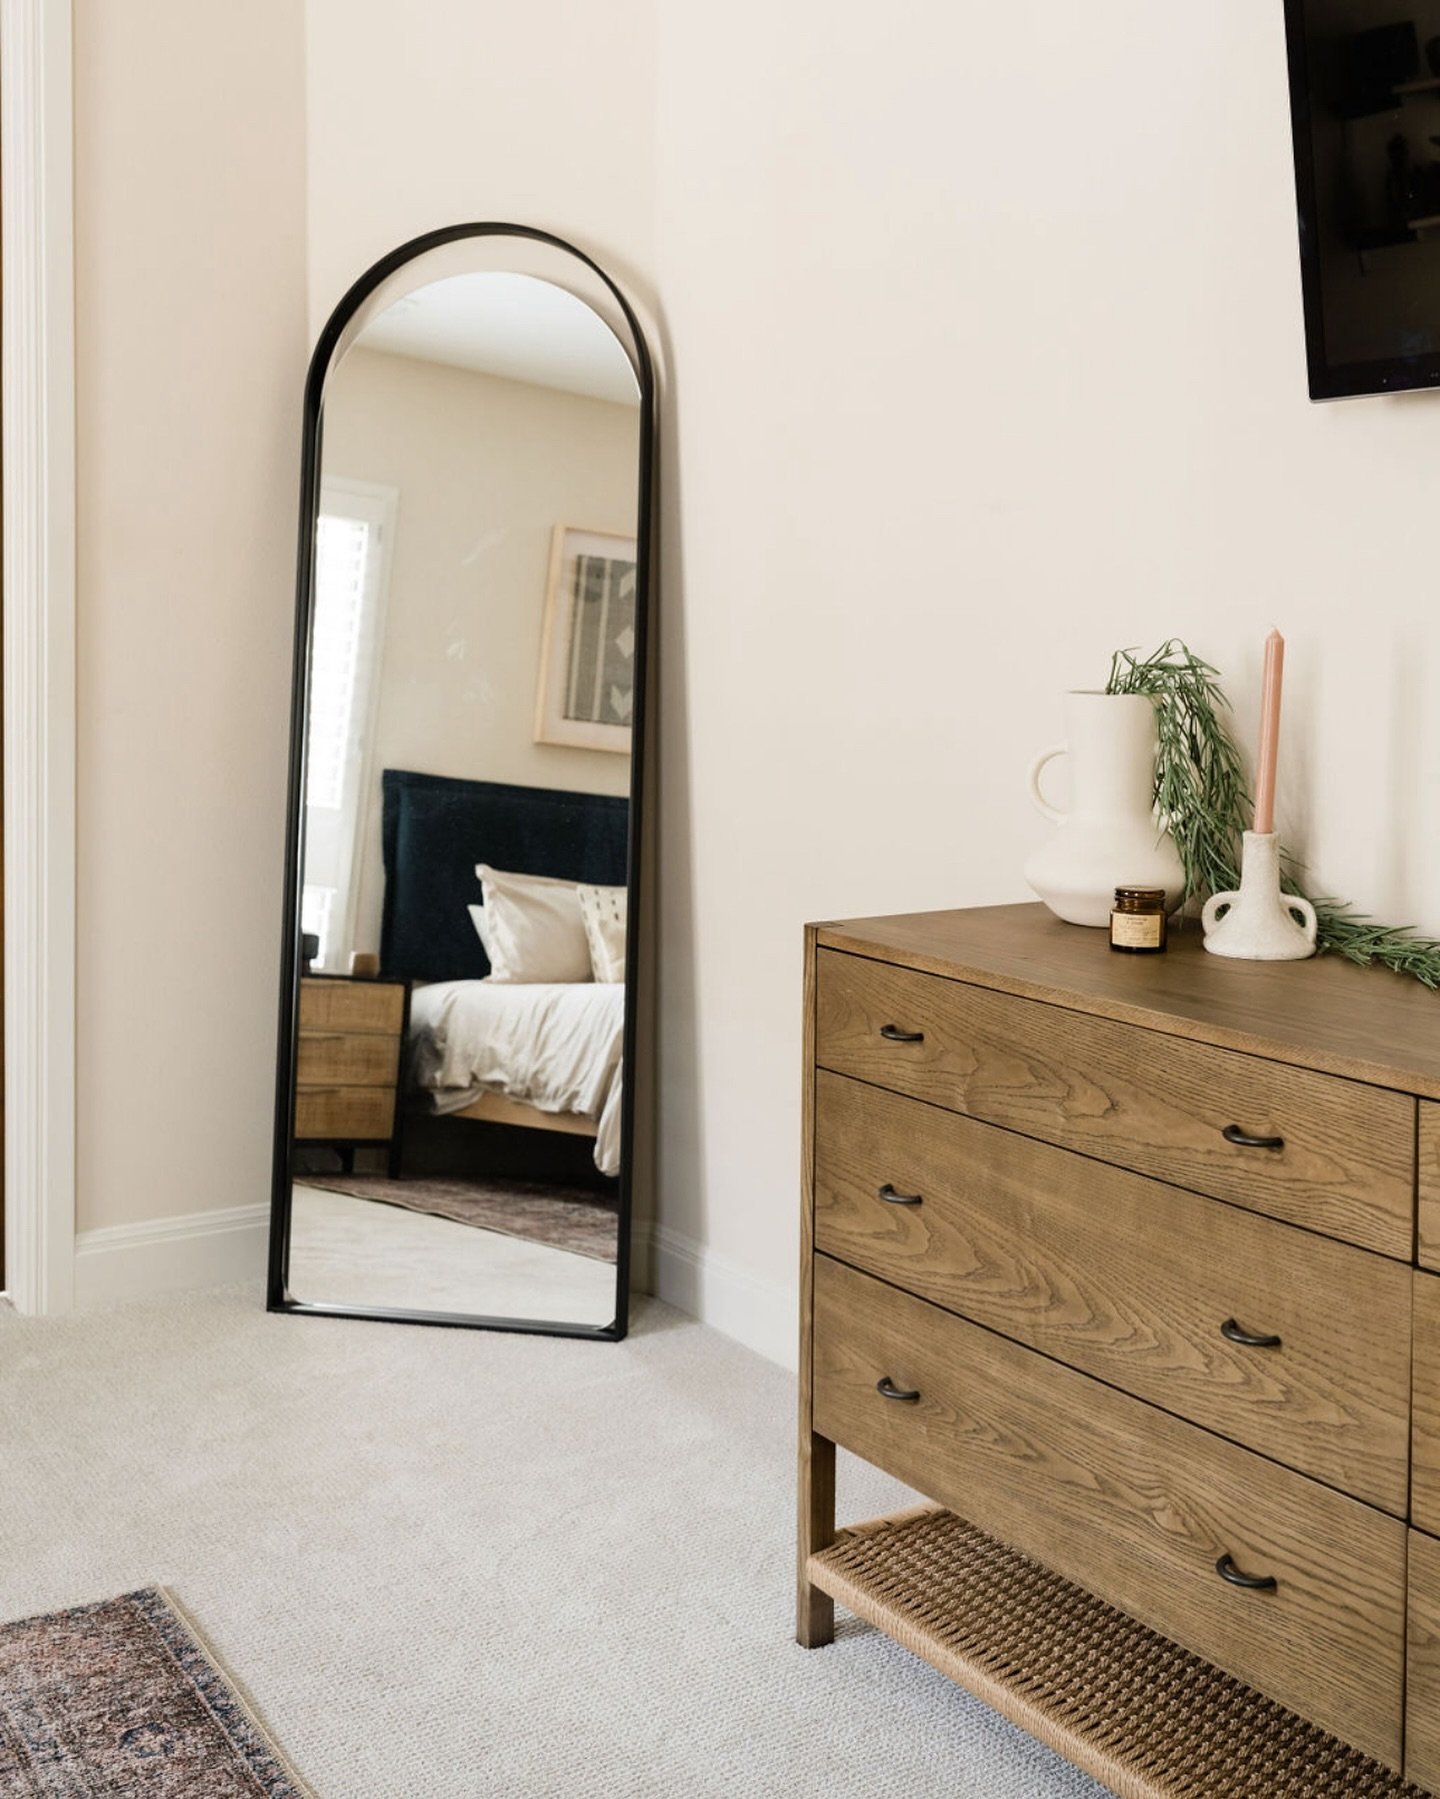 A floor mirror is always a must for me when designing a primary bedroom. When I was young I used to stand on top of my bathtub to check out my outfit in the bathroom mirror. The floor mirror feels easier haha!

Photo by: @madelineharperphoto 

#floor